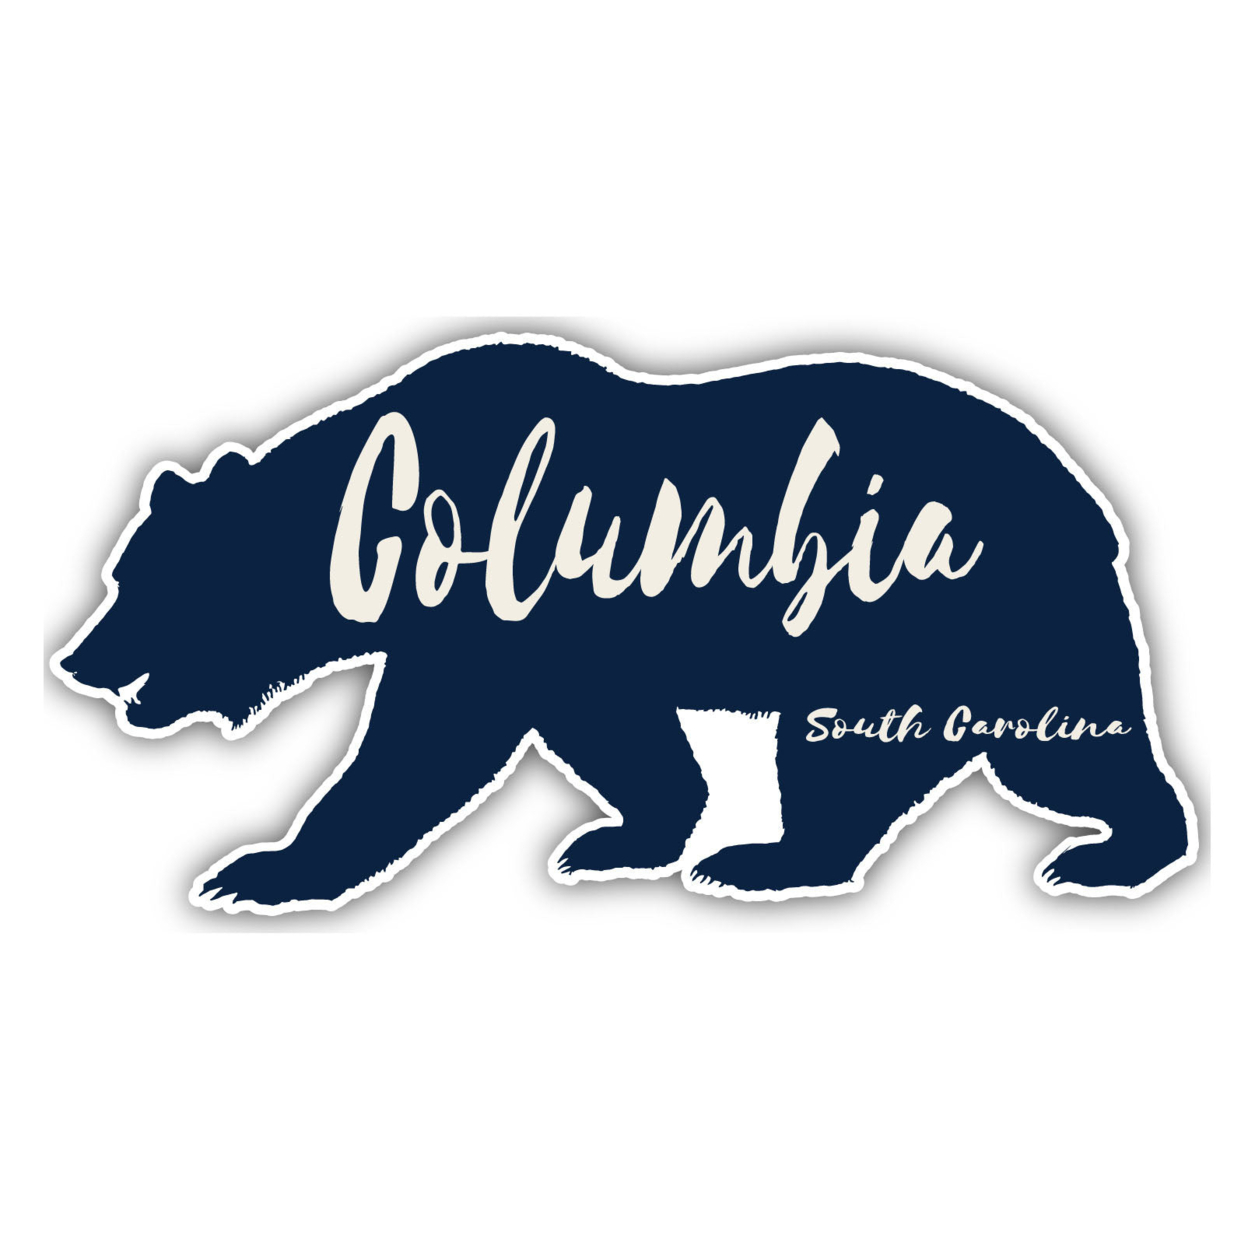 Columbia South Carolina Souvenir Decorative Stickers (Choose Theme And Size) - 4-Pack, 8-Inch, Bear